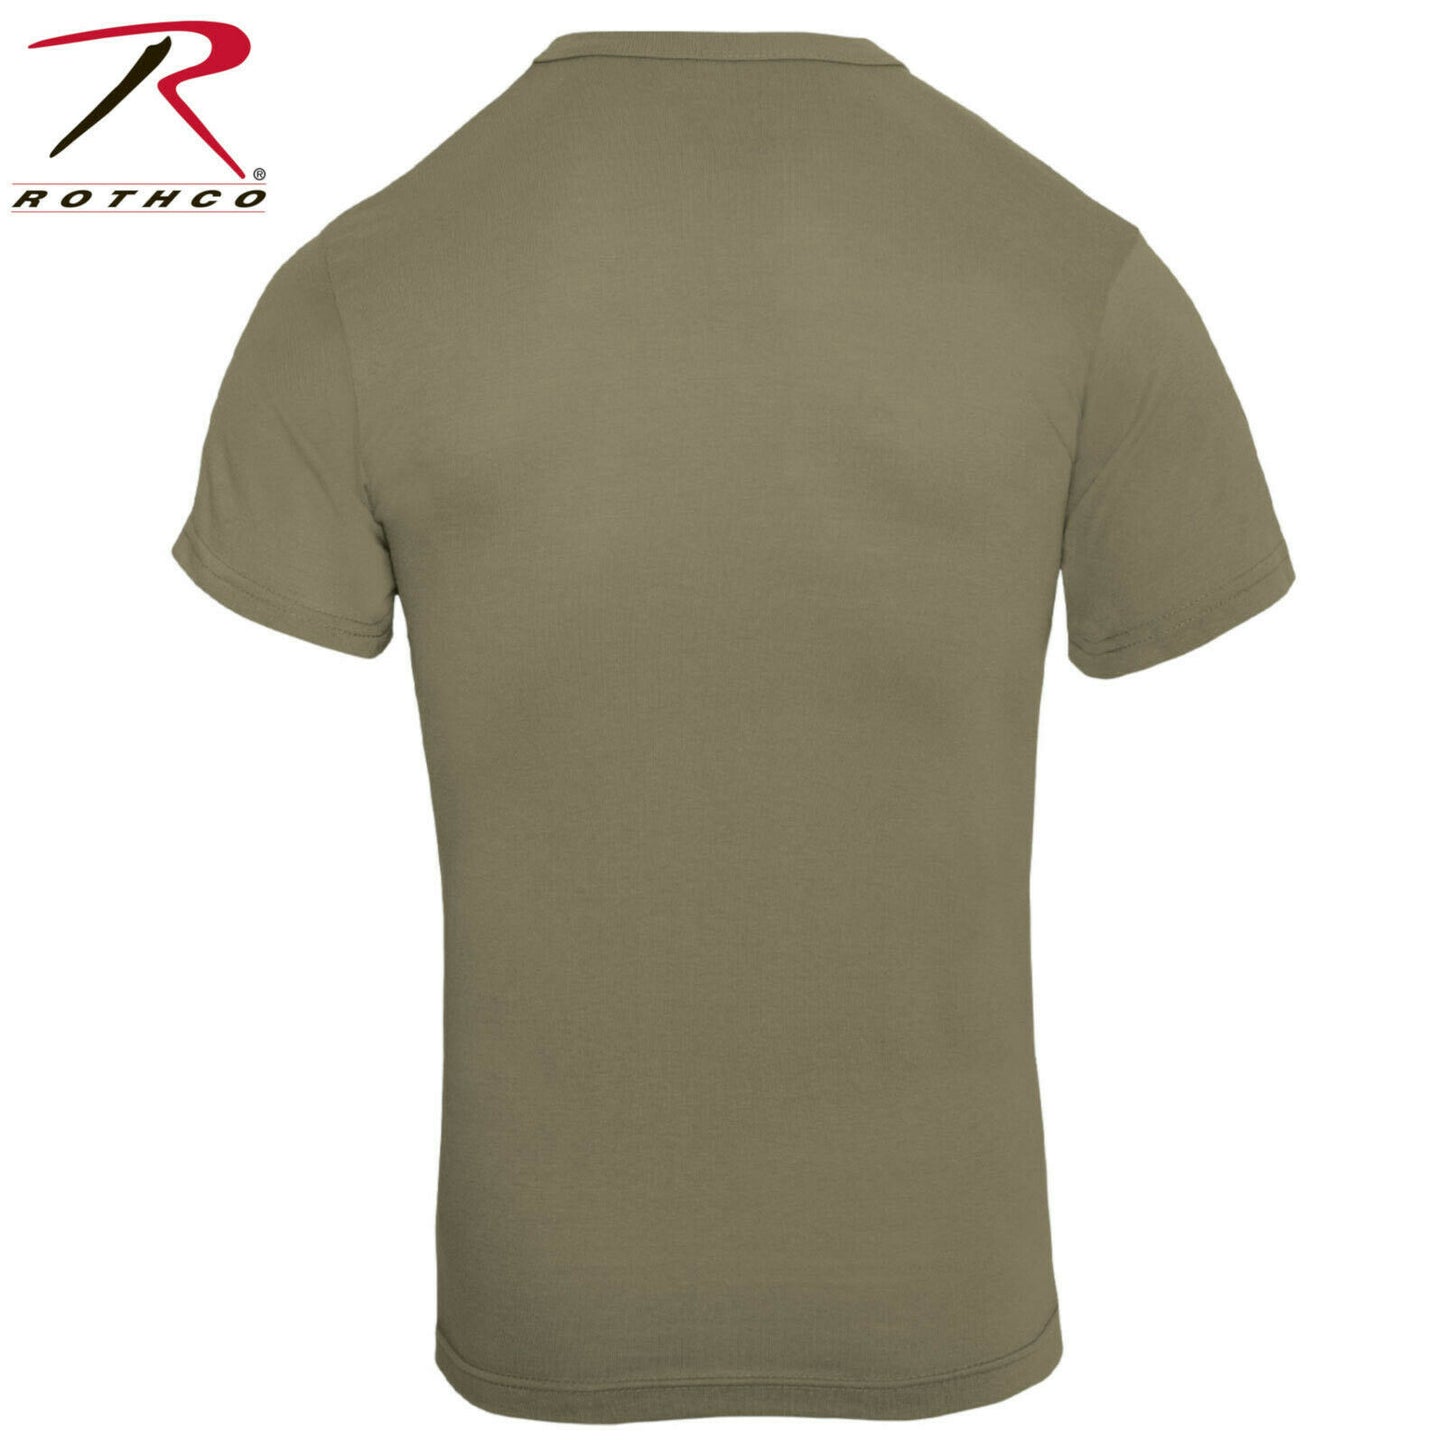 Rothco Men's AR 670-1 Coyote Brown ARMY Physical Training T-Shirt